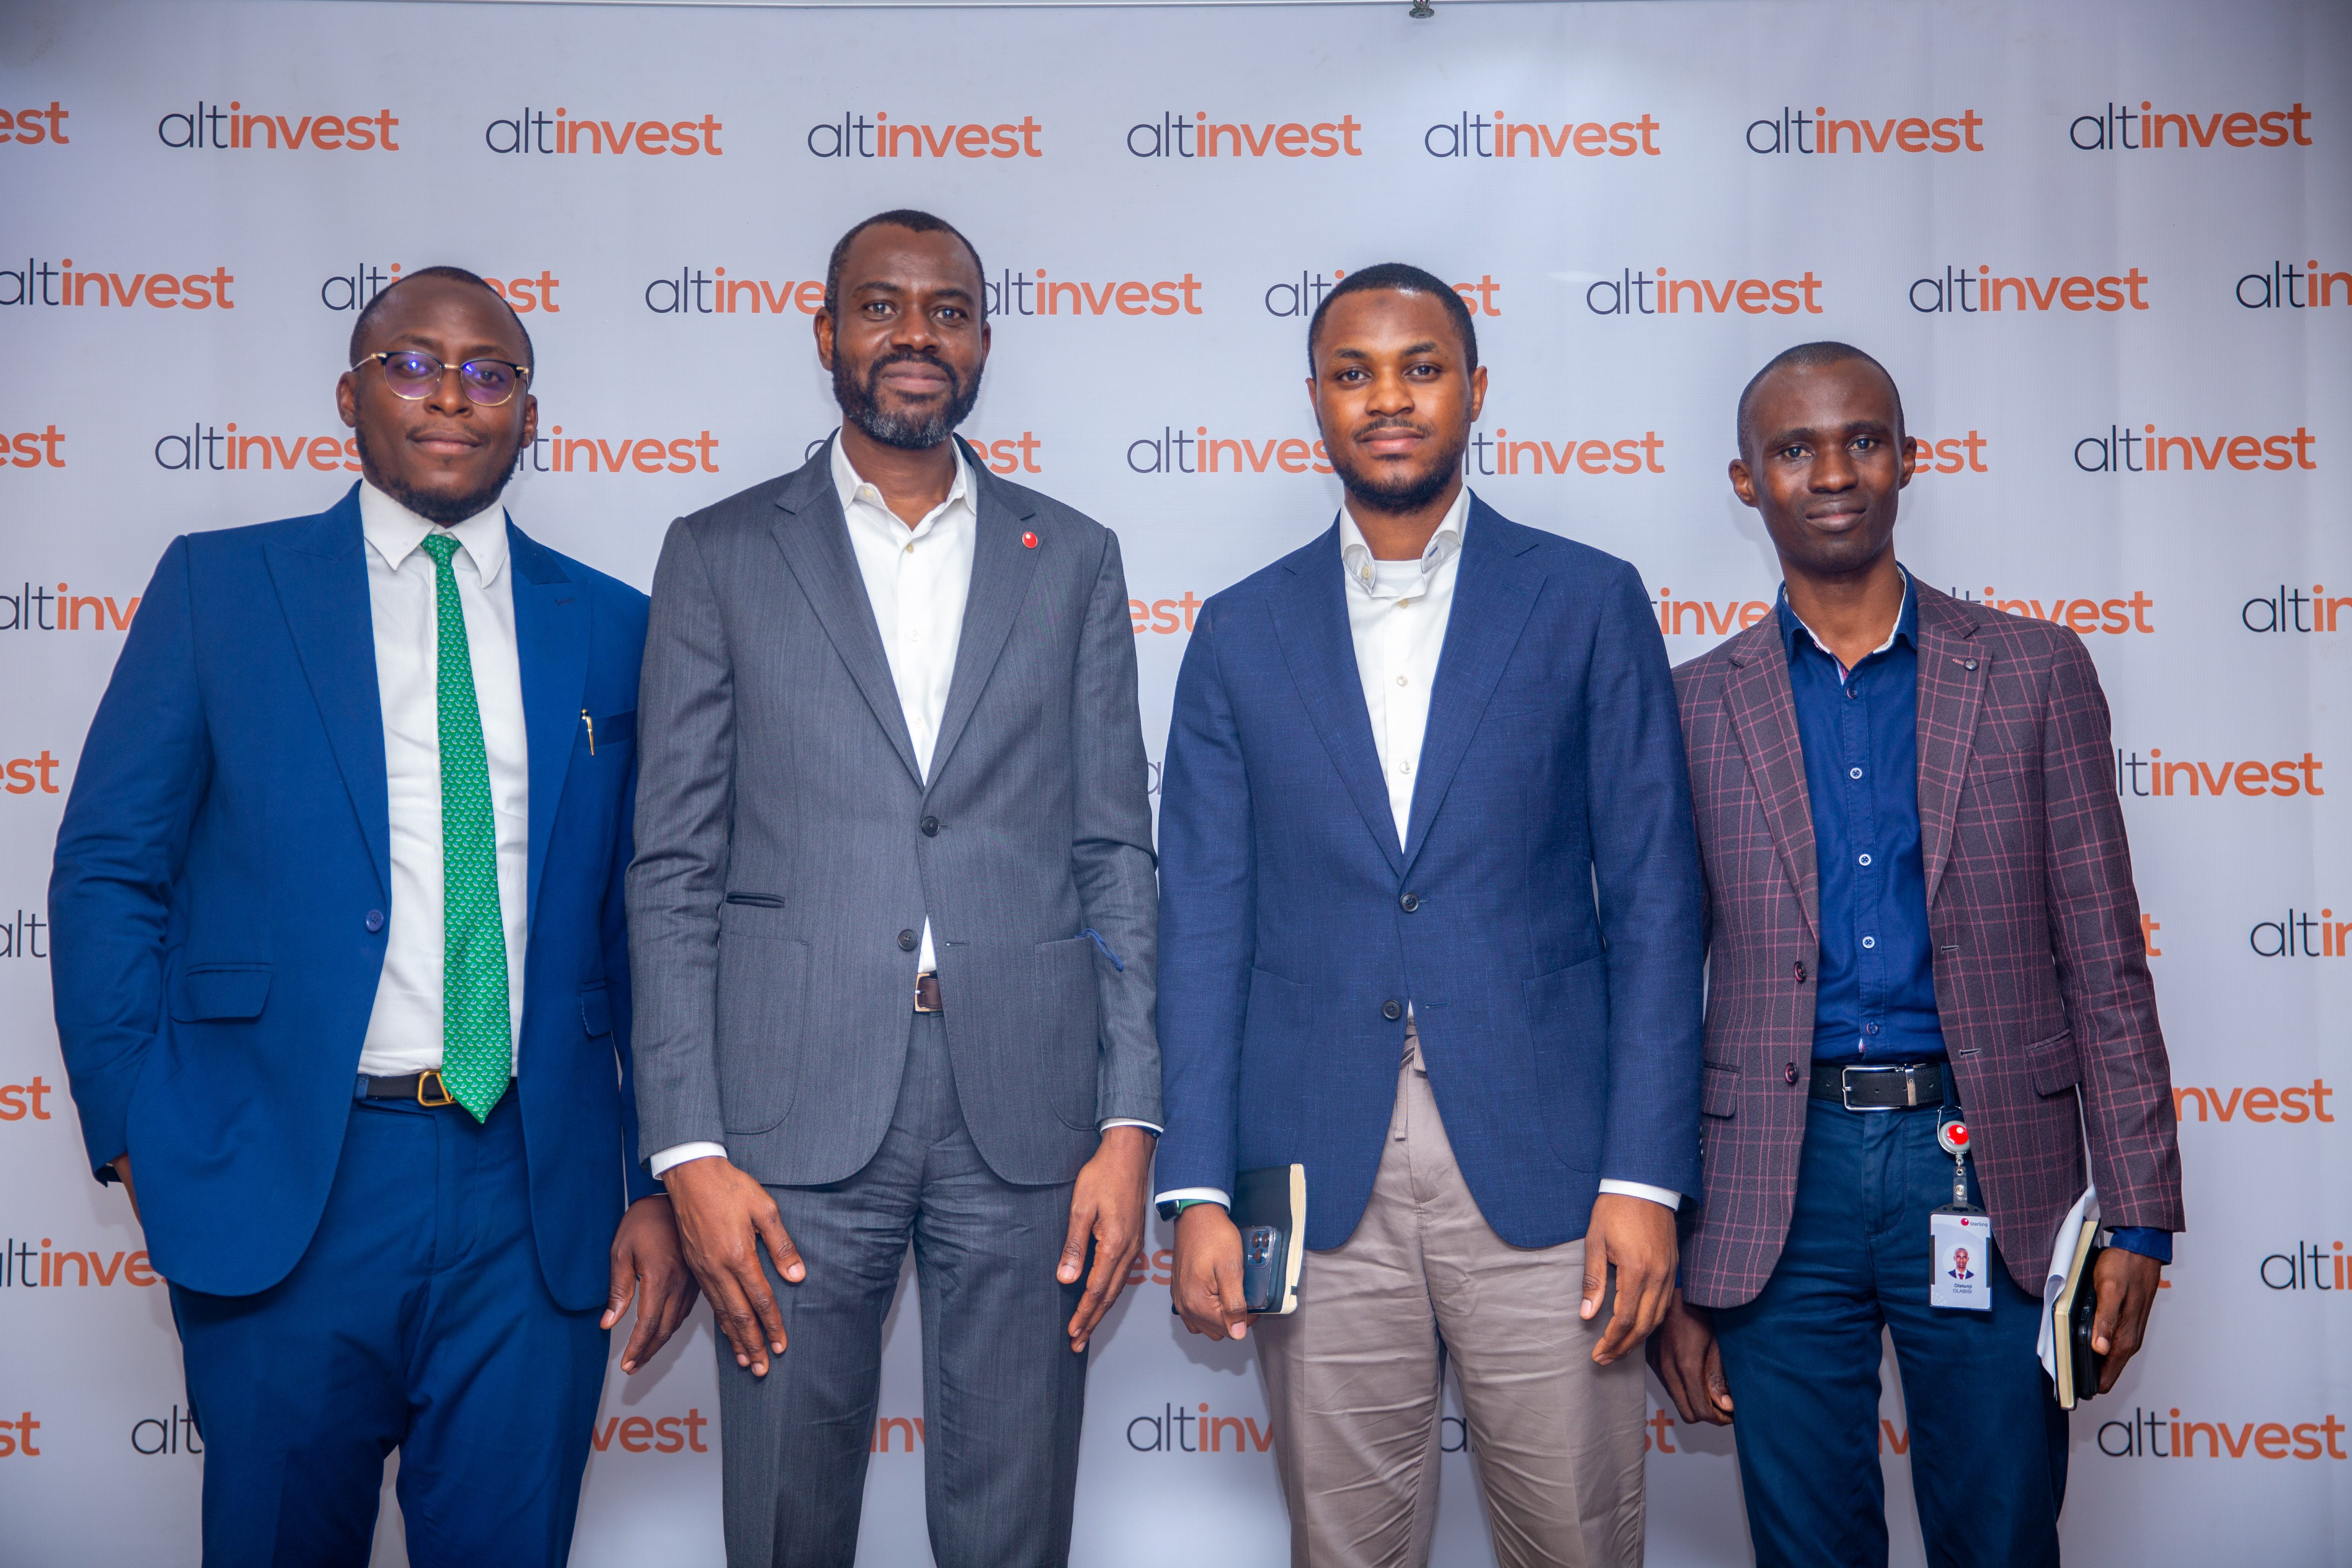 AltInvest offers Wealth creation, capital appreciation, others, with focus on real sectors of the economy 